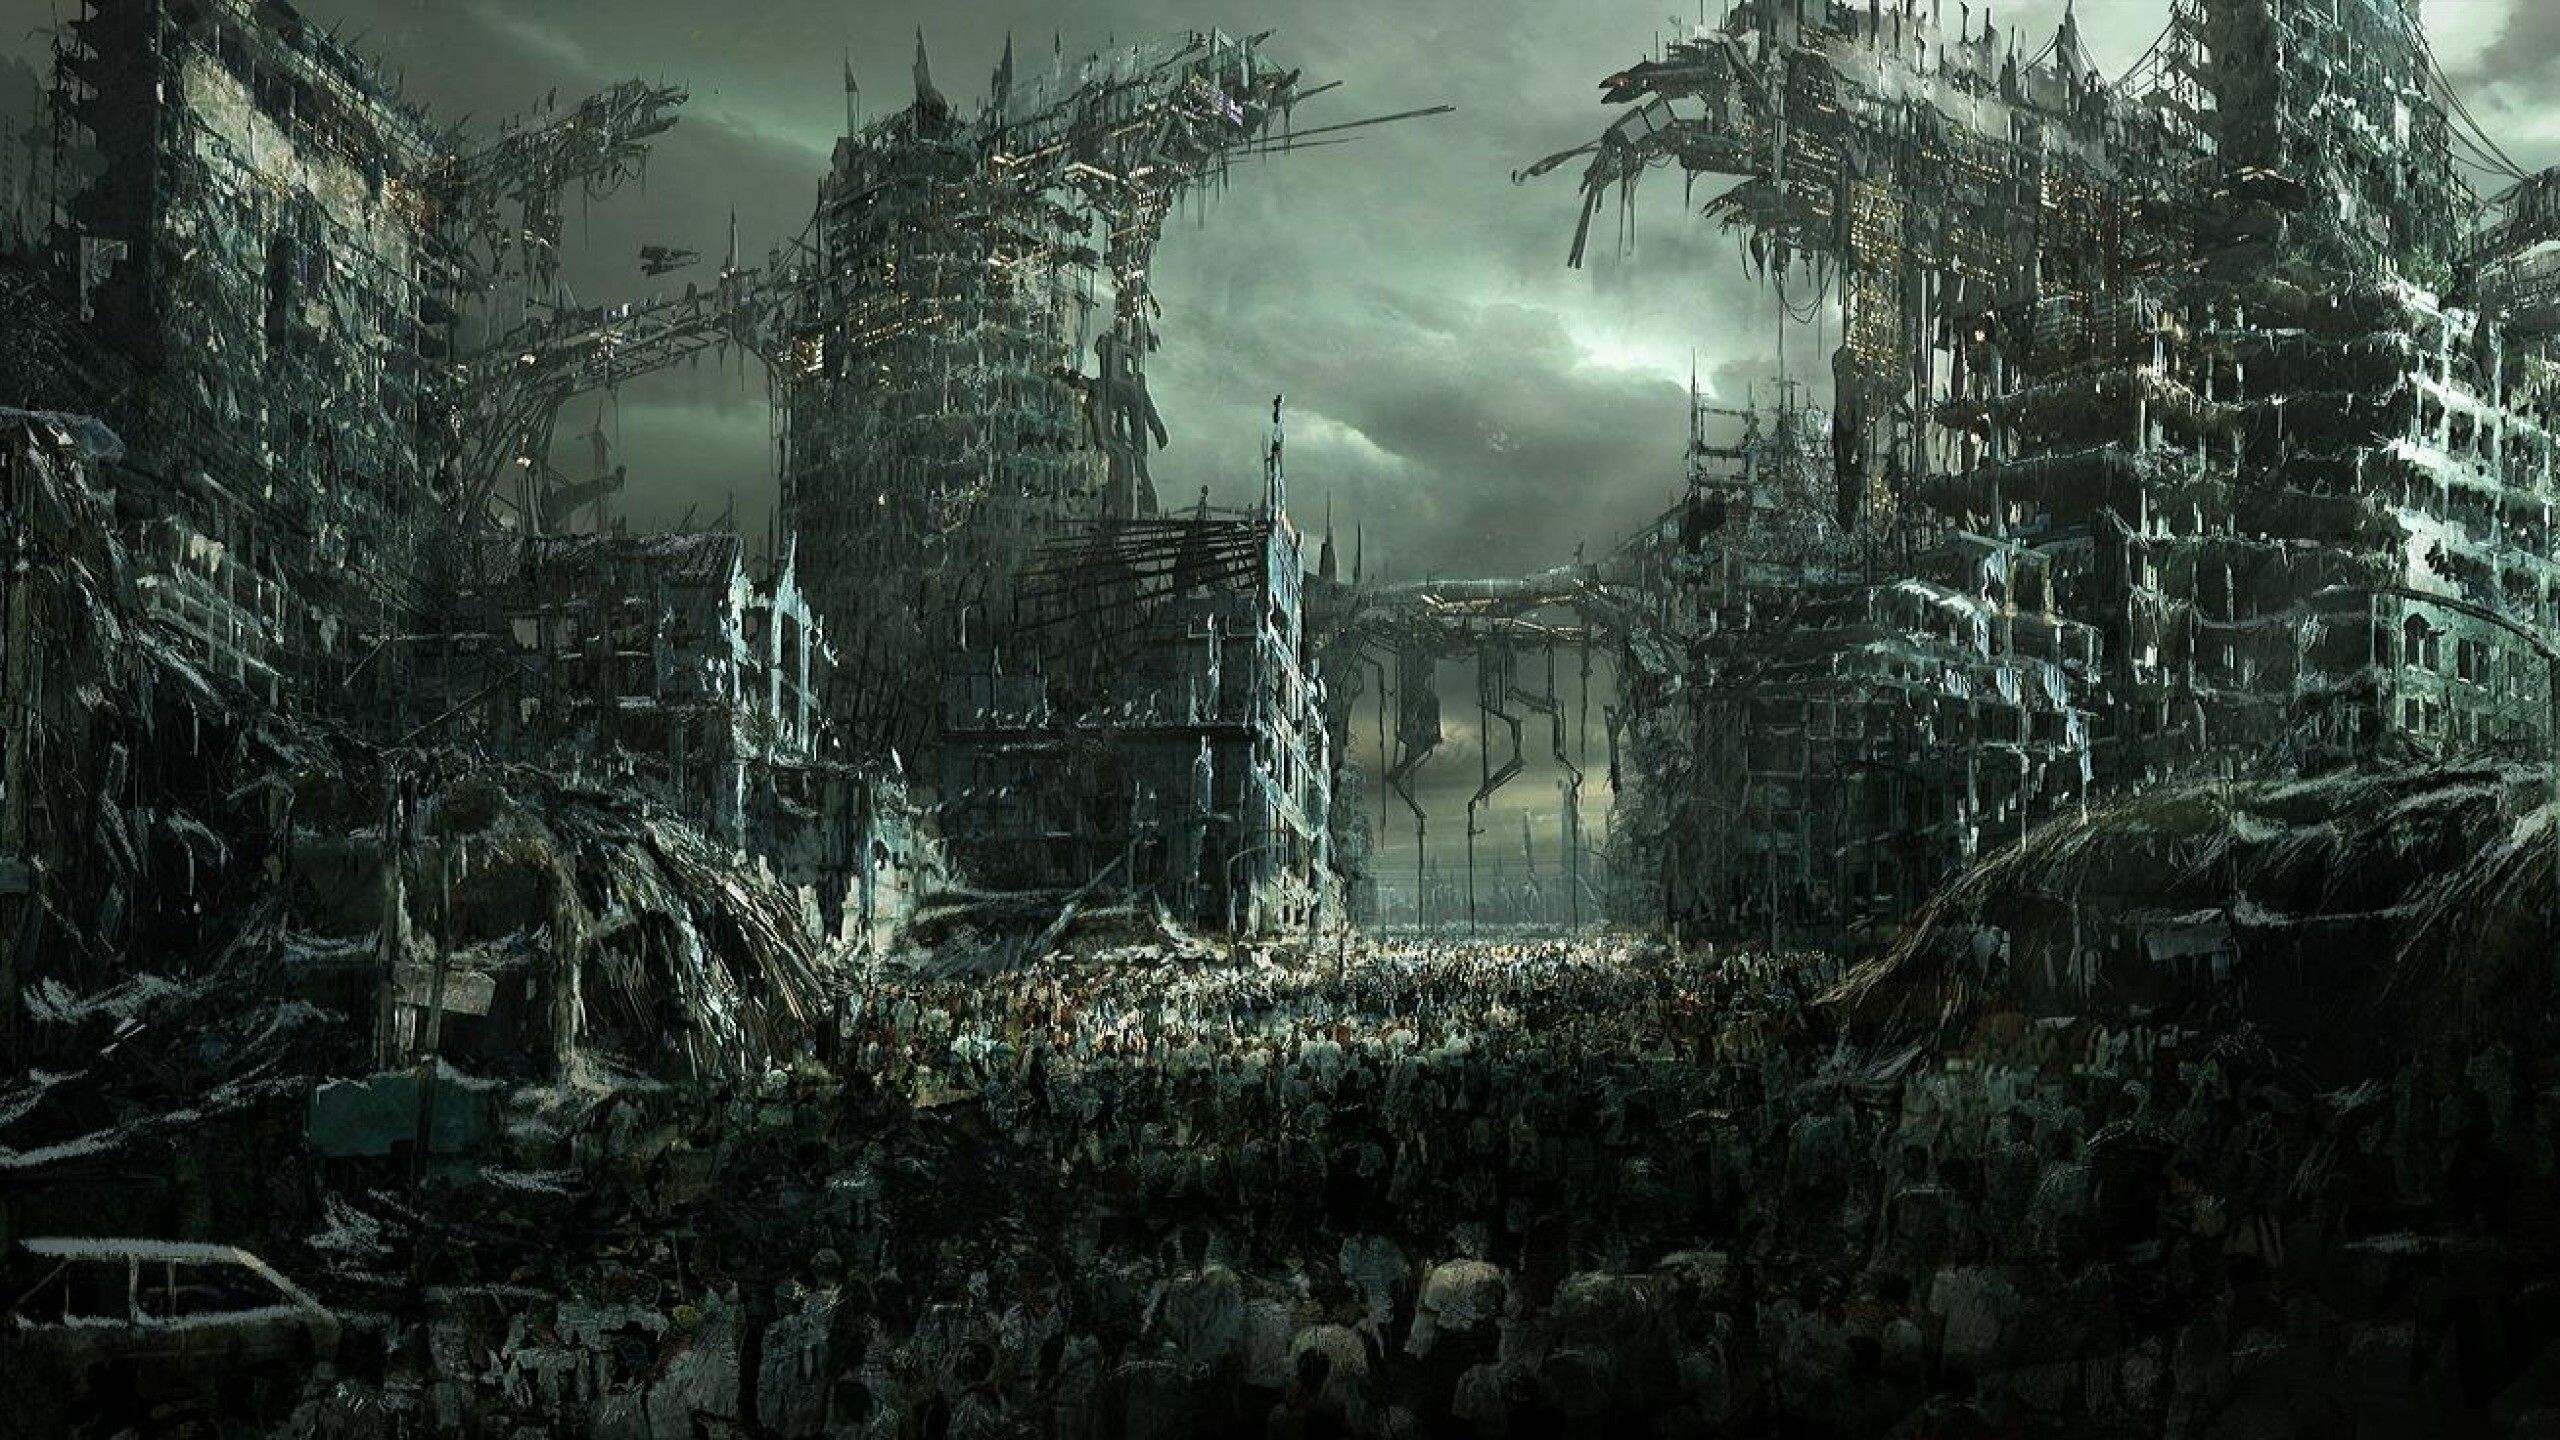 Post-apocalypse: City, Overwhelming swarms of zombies. 2560x1440 HD Wallpaper.